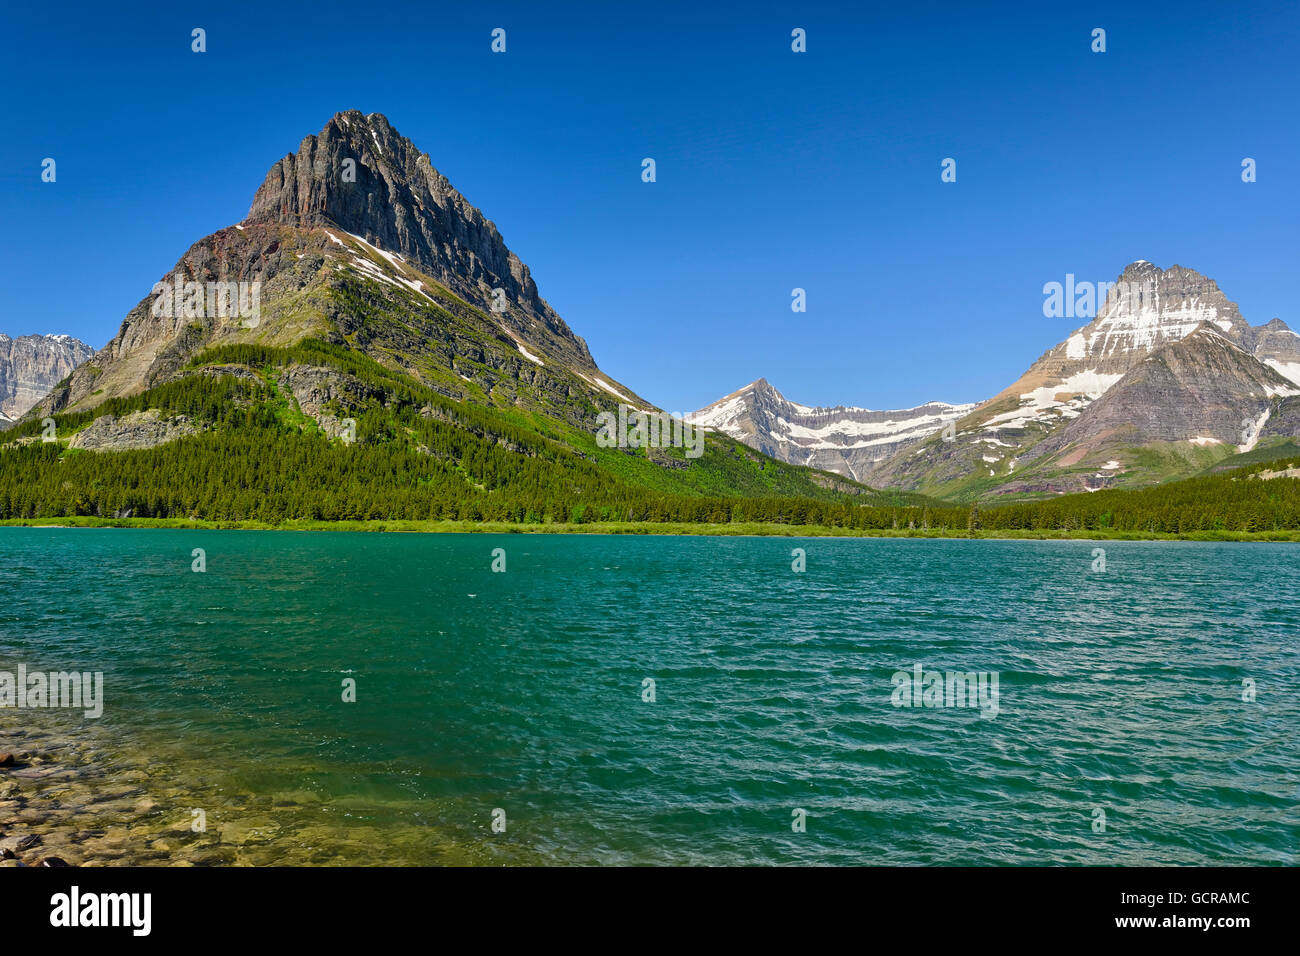 Clements Mountain and Hidden Lake, Glacier National Park, Montana Stock Photo